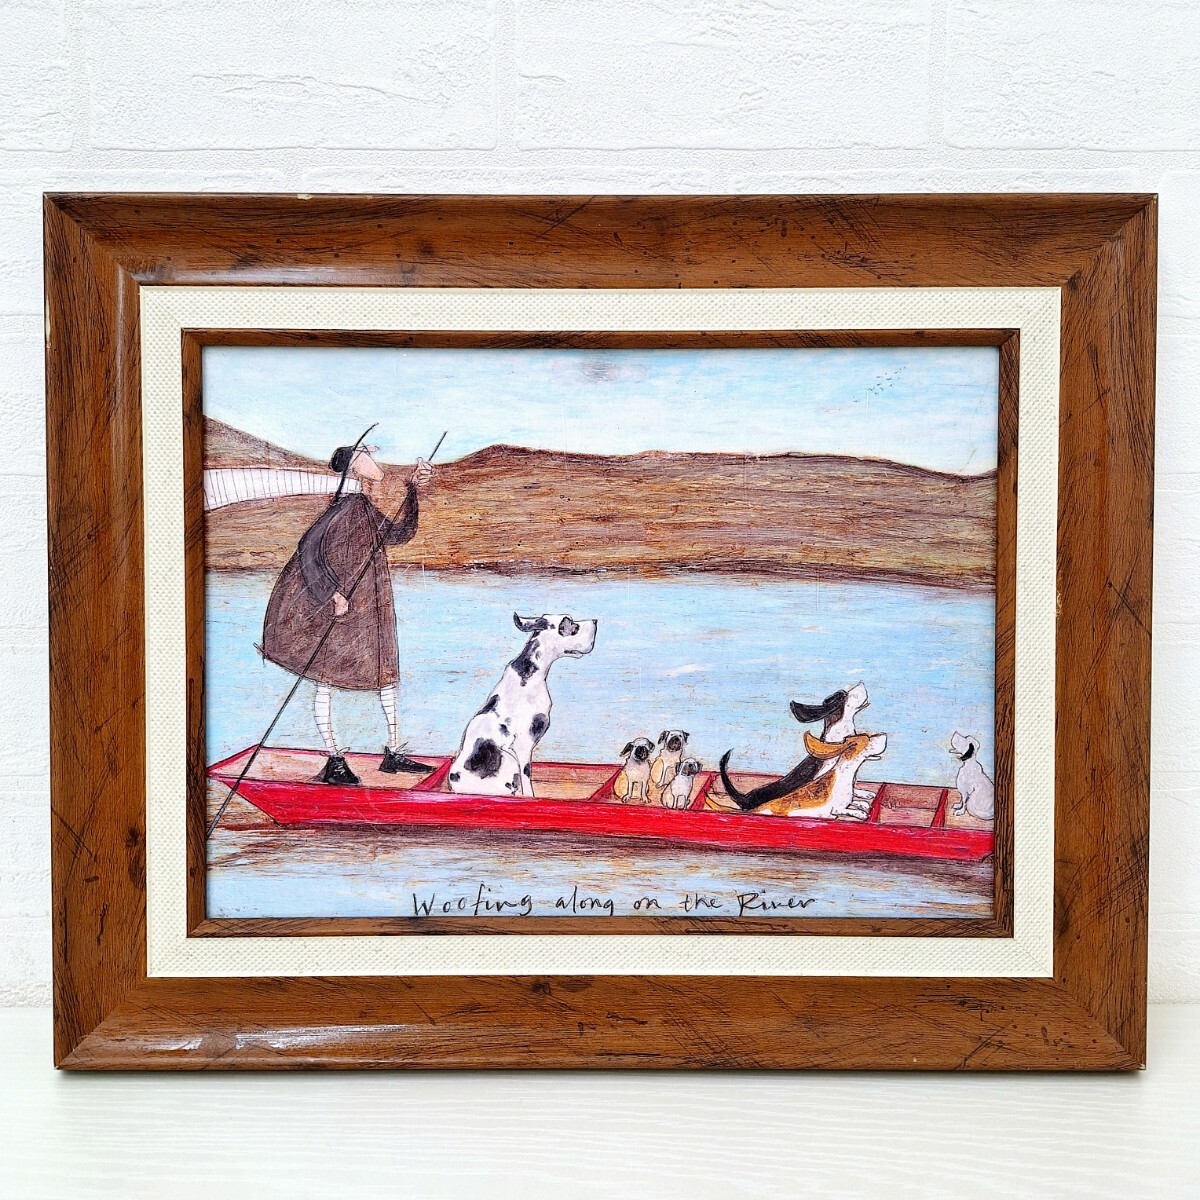 Samtoft Wan Wan River Cruise Painting Art Frame Dog River British Artist Wall Hanging Interior Oil Painting Art Art WK, furniture, interior, interior accessories, others